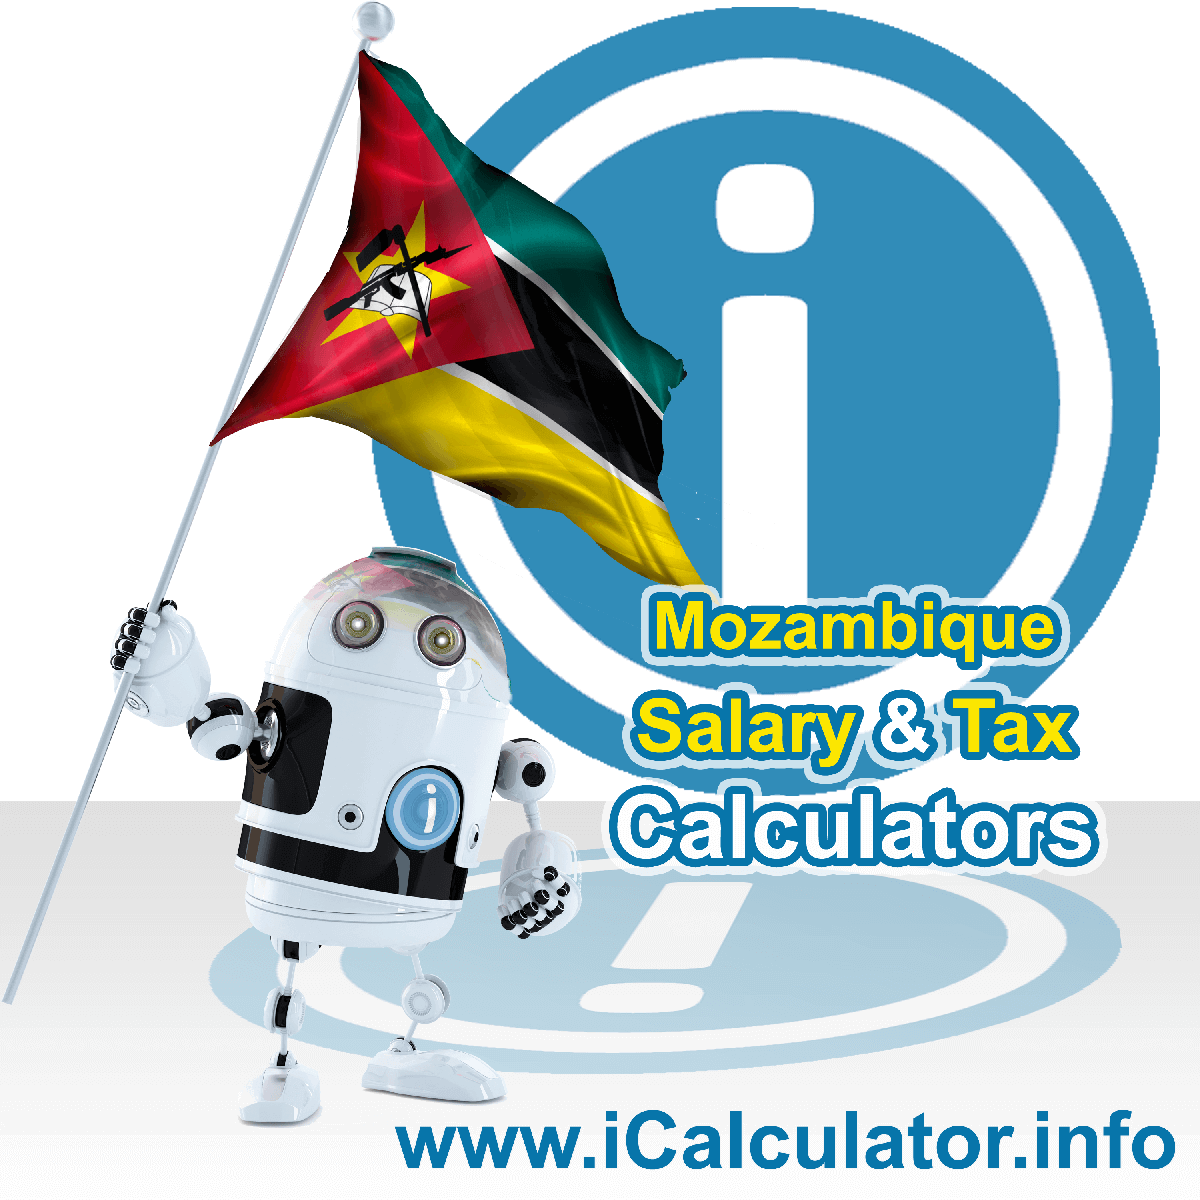 Mozambique Wage Calculator. This image shows the Mozambique flag and information relating to the tax formula for the Mozambique Tax Calculator